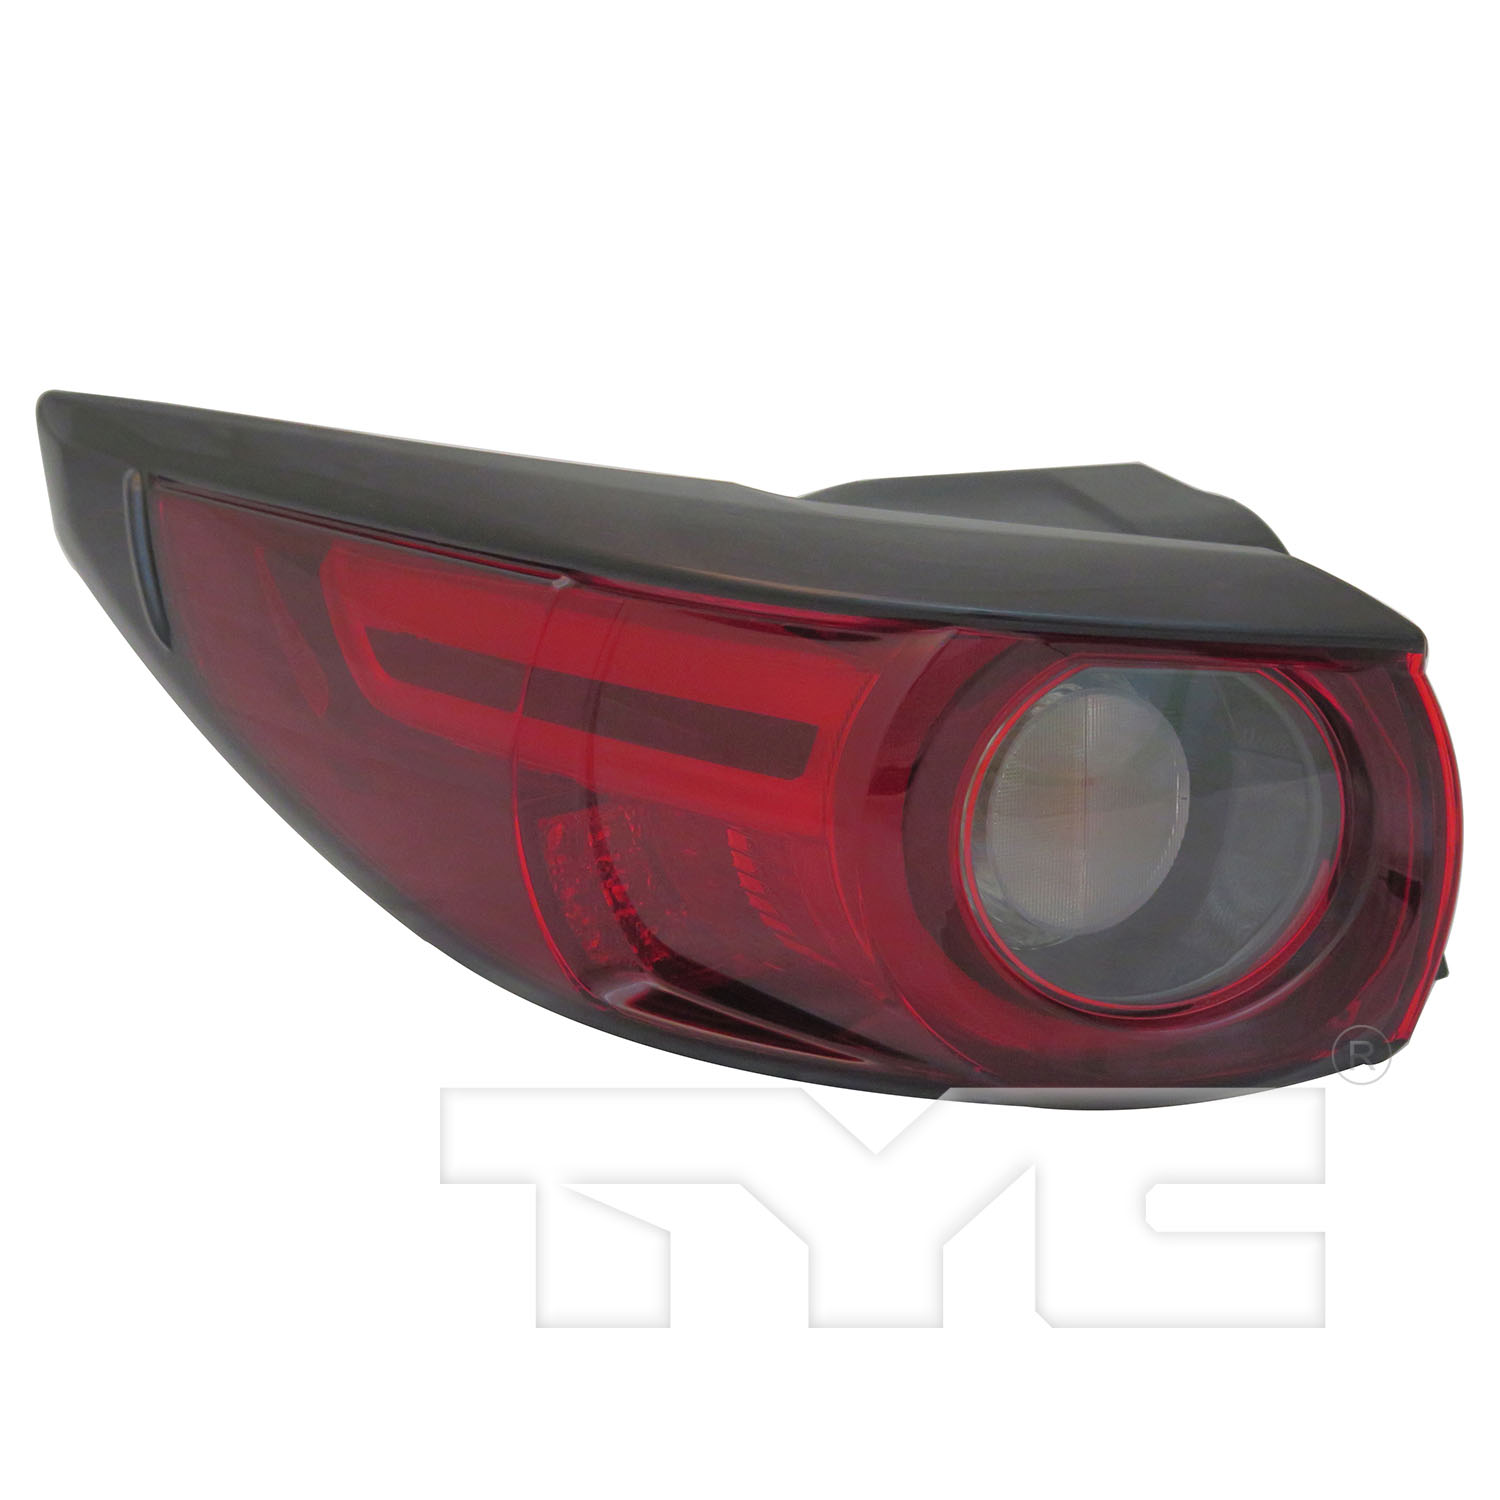 Aftermarket TAILLIGHTS for MAZDA - CX-5, CX-5,17-21,LT Taillamp assy outer